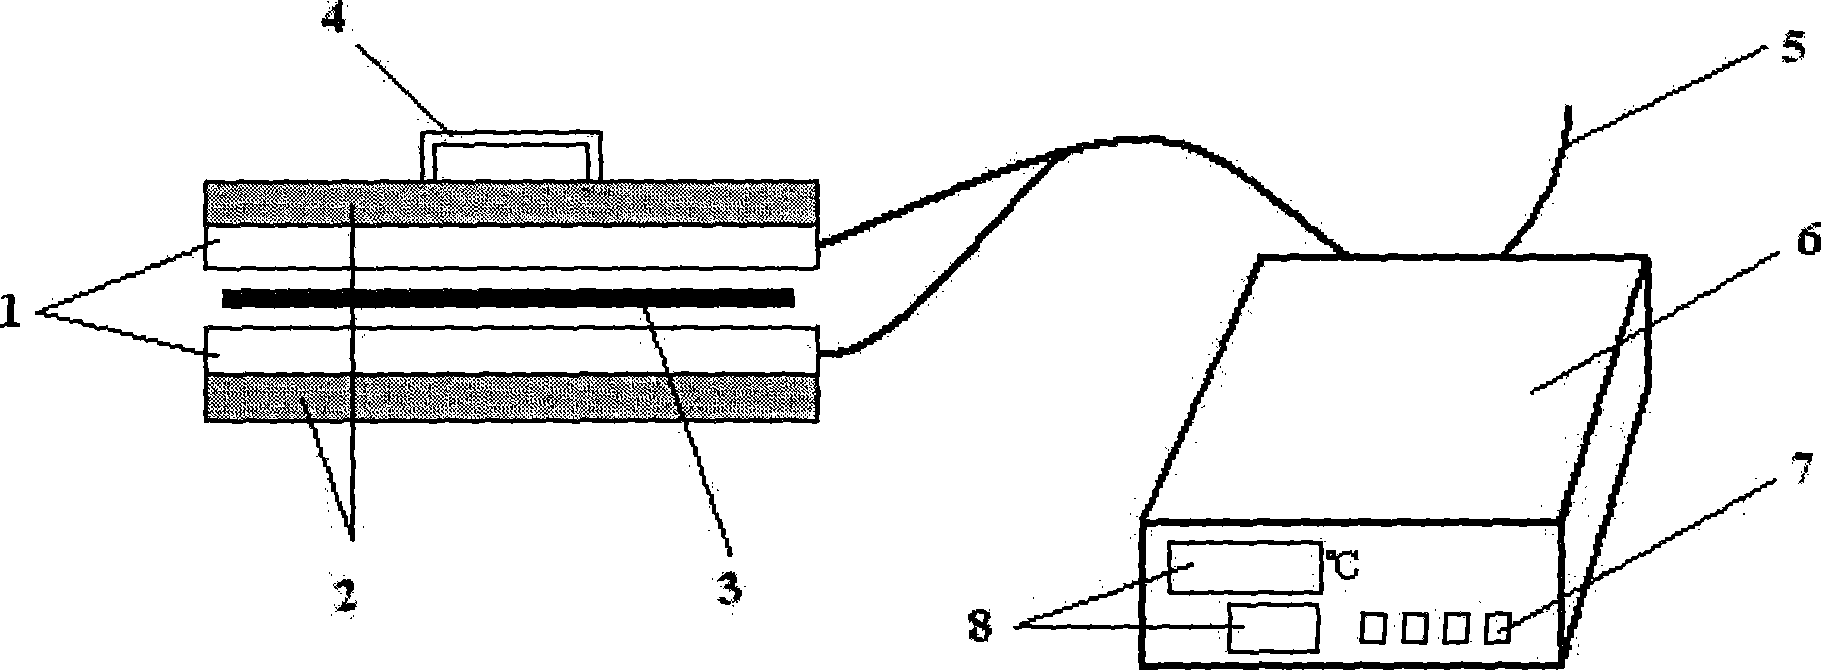 Fixation method and apparatus for inking and printing on cotton with active ink